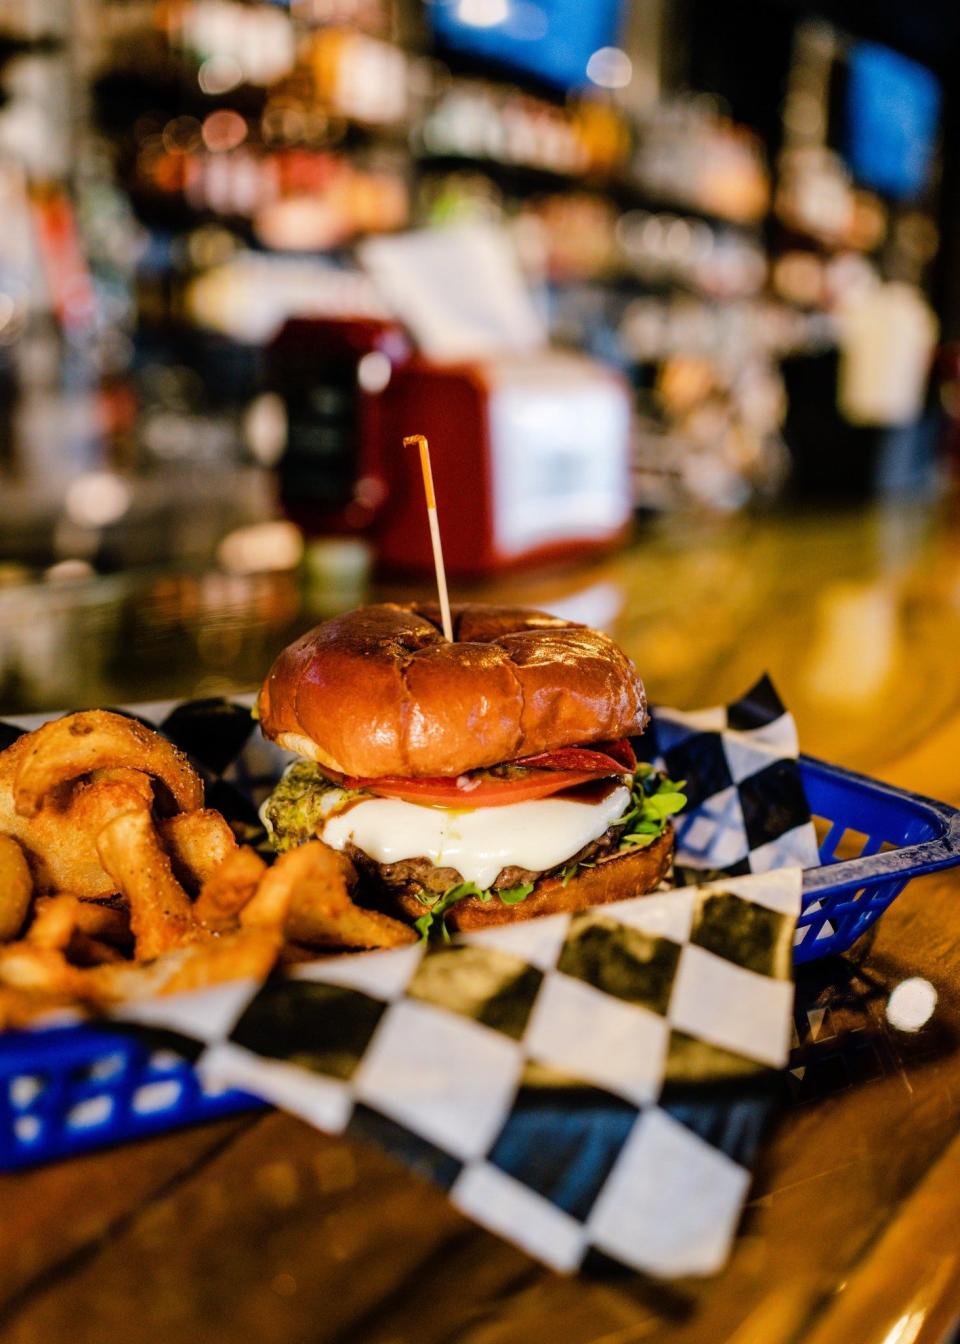 Fatboys, a casual eatery known for its signature burgers and wings, is bringing a location to 8651 Navarre Parkway soon. Pictured is The Italian burger.